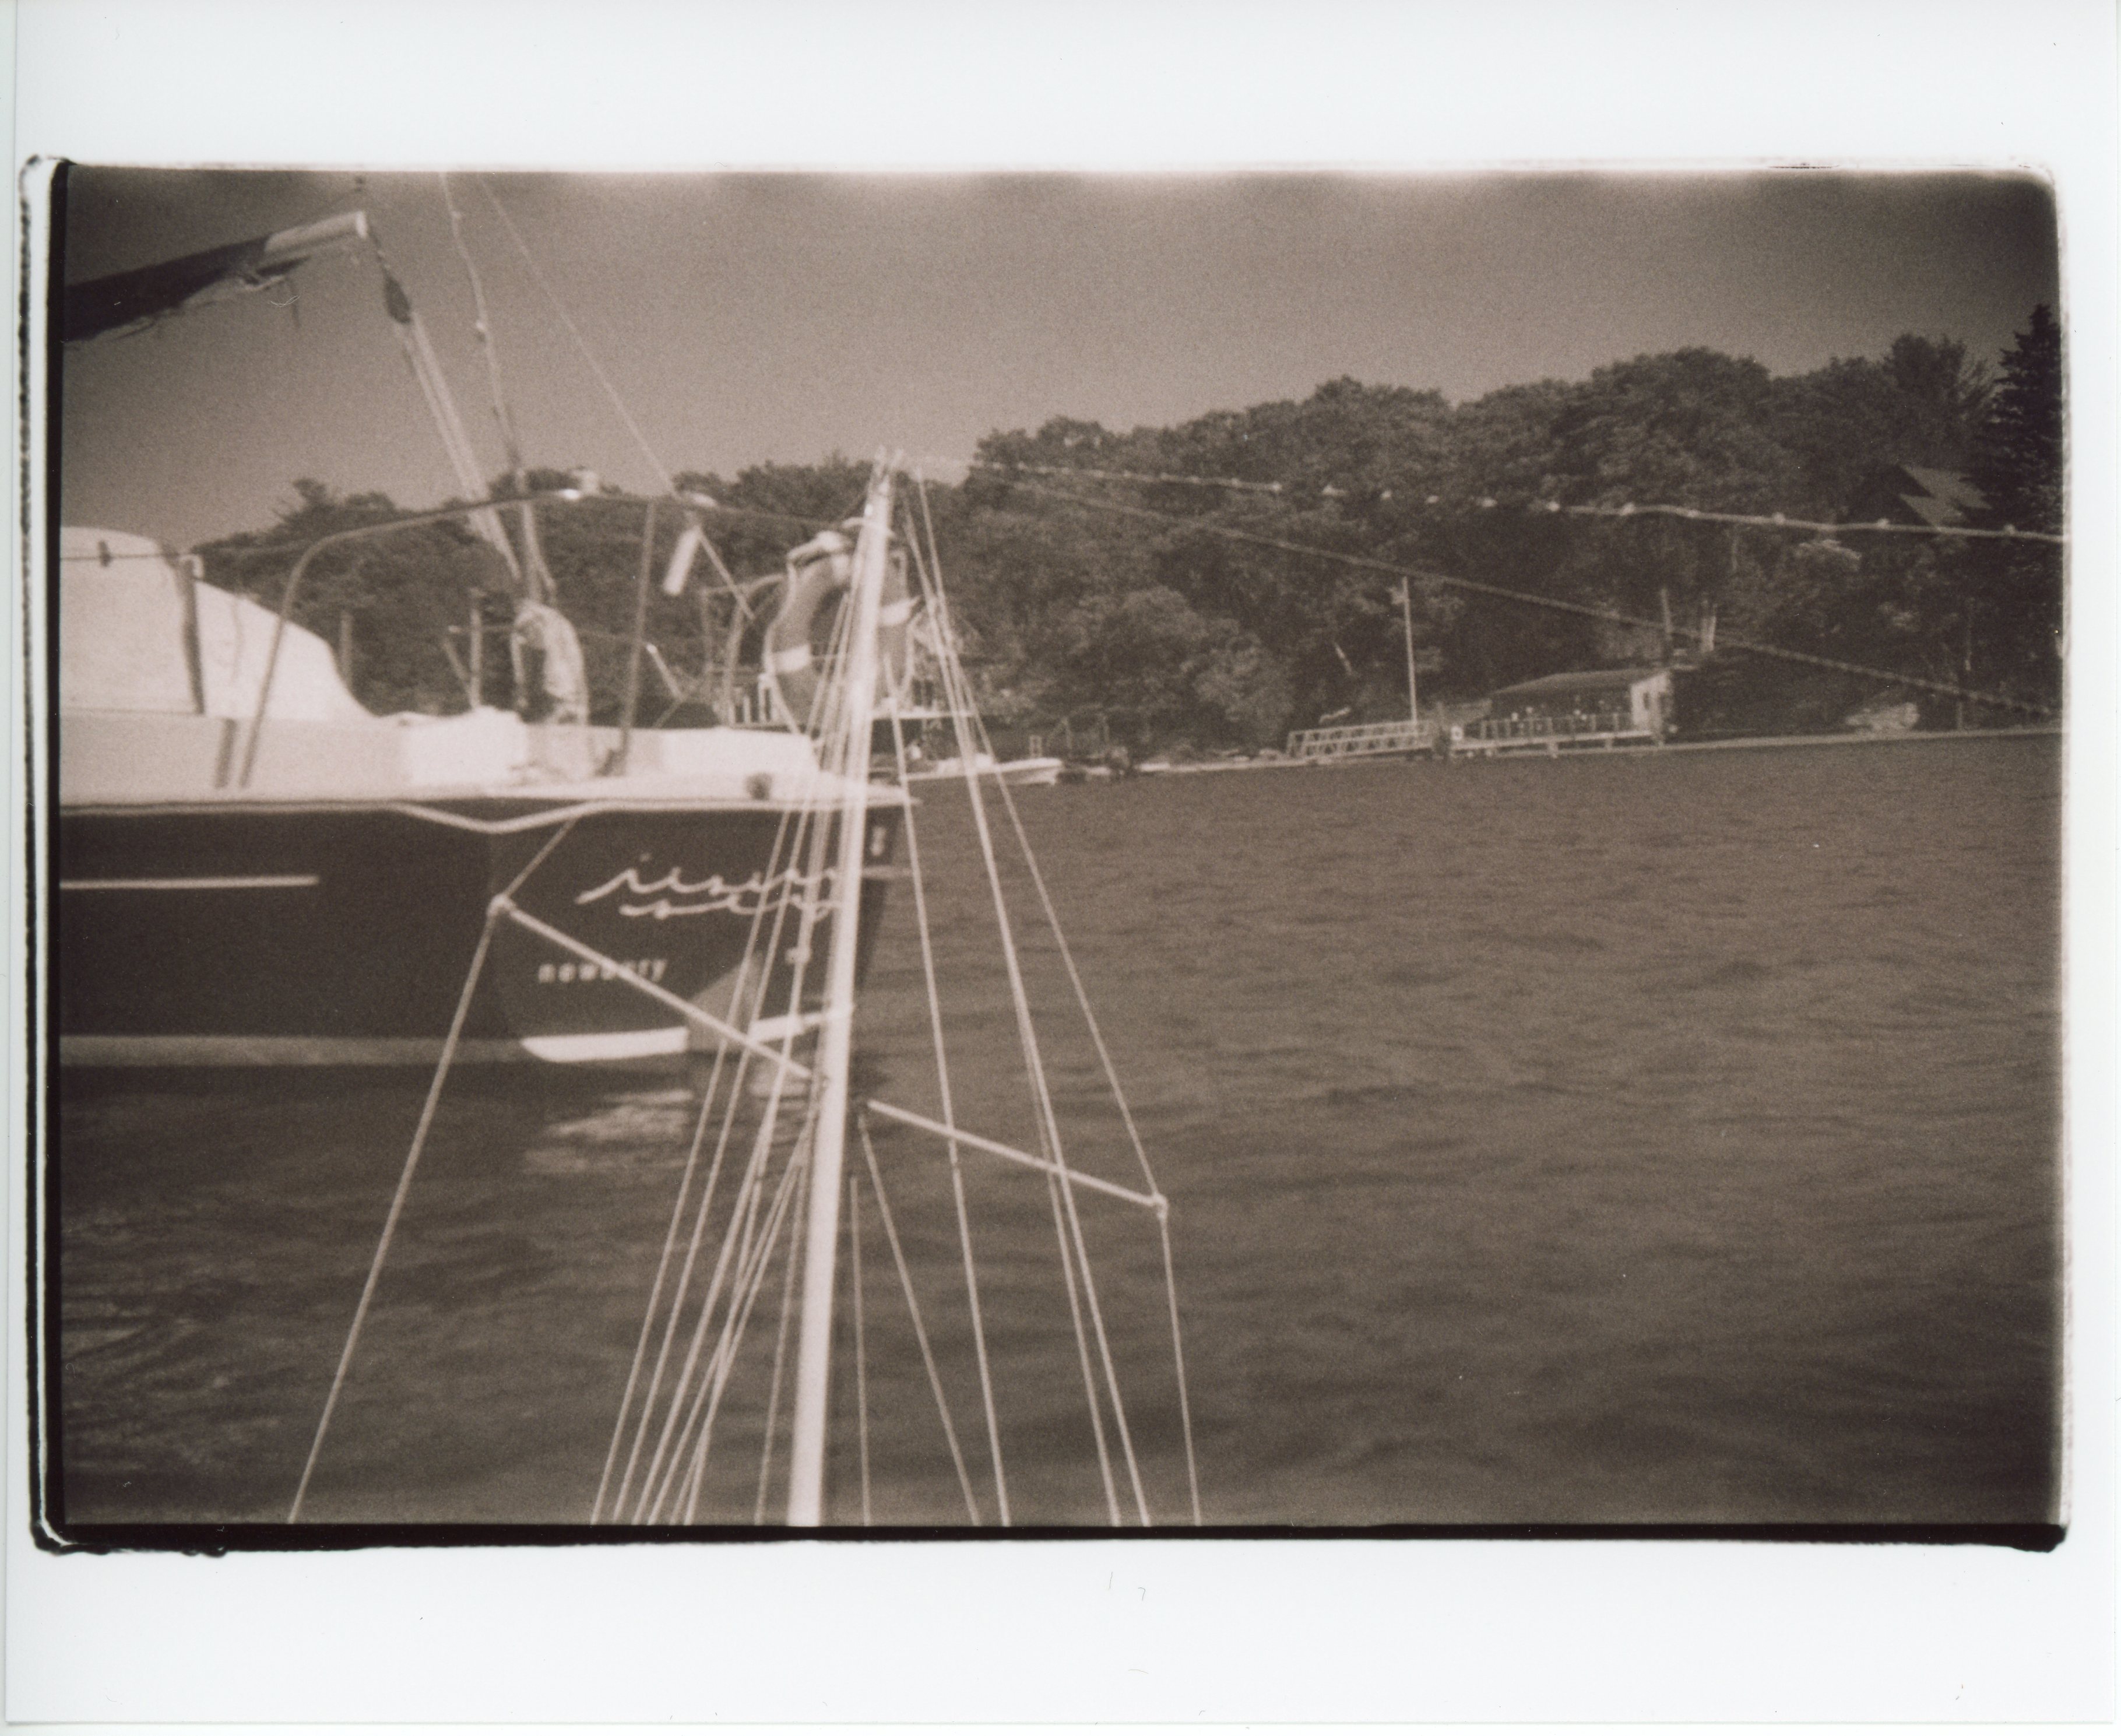 a black and white, sepia toned, 35mm print with messy edges; the image is double exposure of the mast and lines against a clear sky overlaid on an image of the stern of a boat in a harbor; on the transom in white cursive letters it says rising sea, below in serif lowercase: newbury, ma; there is a strip of land and trees in the background